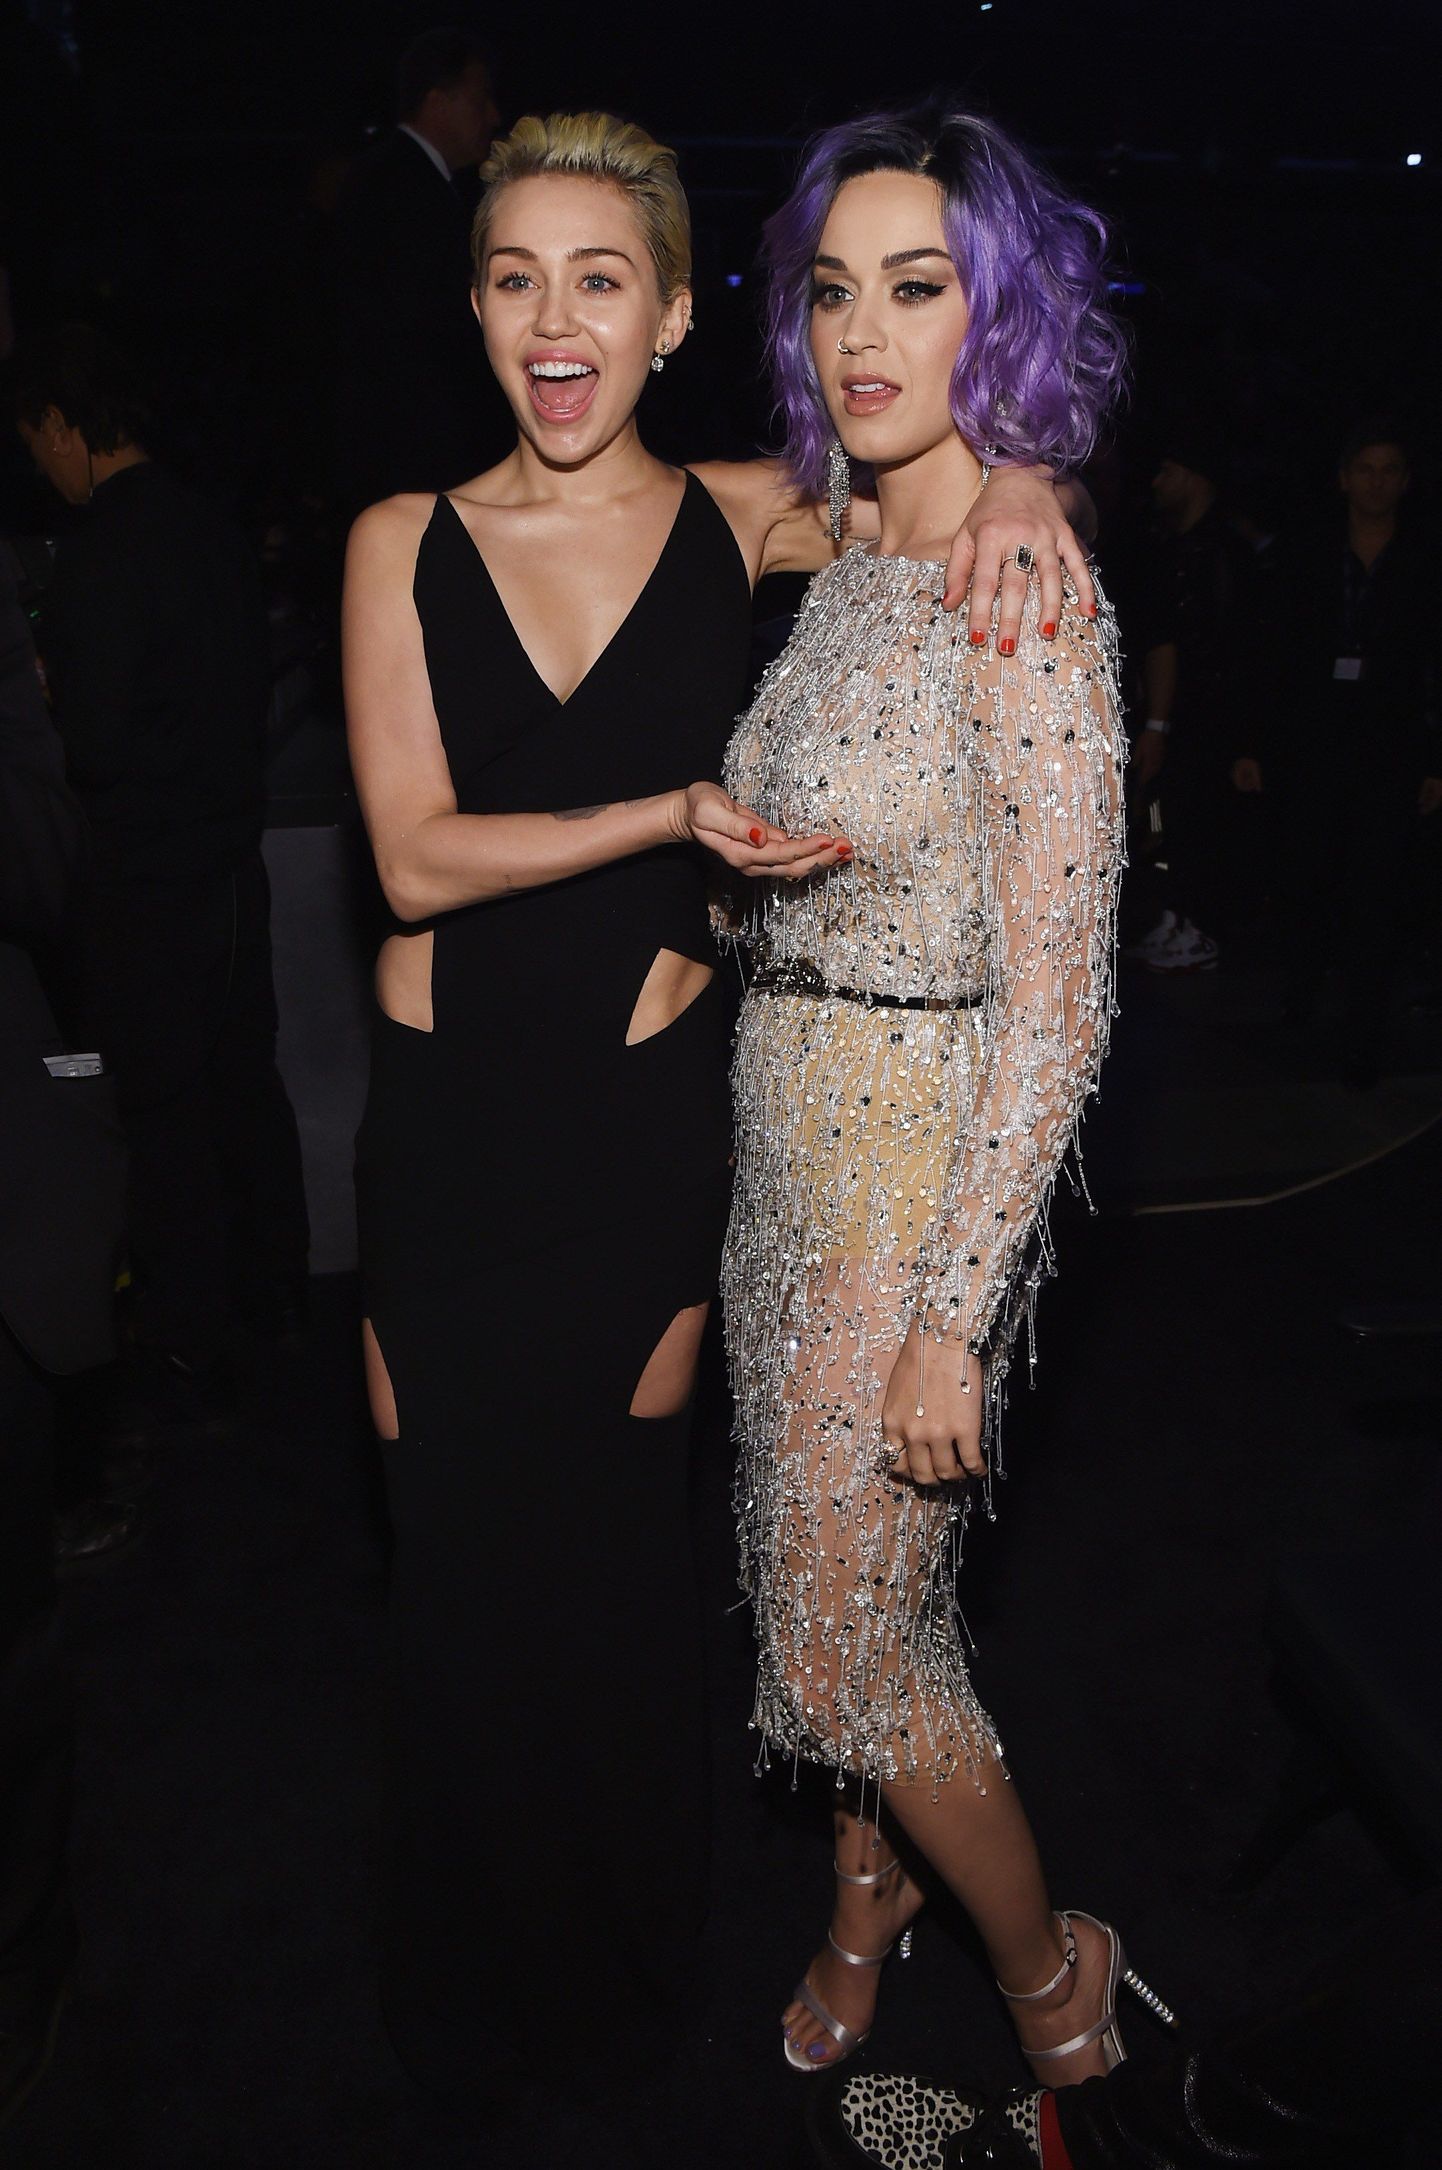 LOS ANGELES - Artists Miley Cyrus and Katy Perry